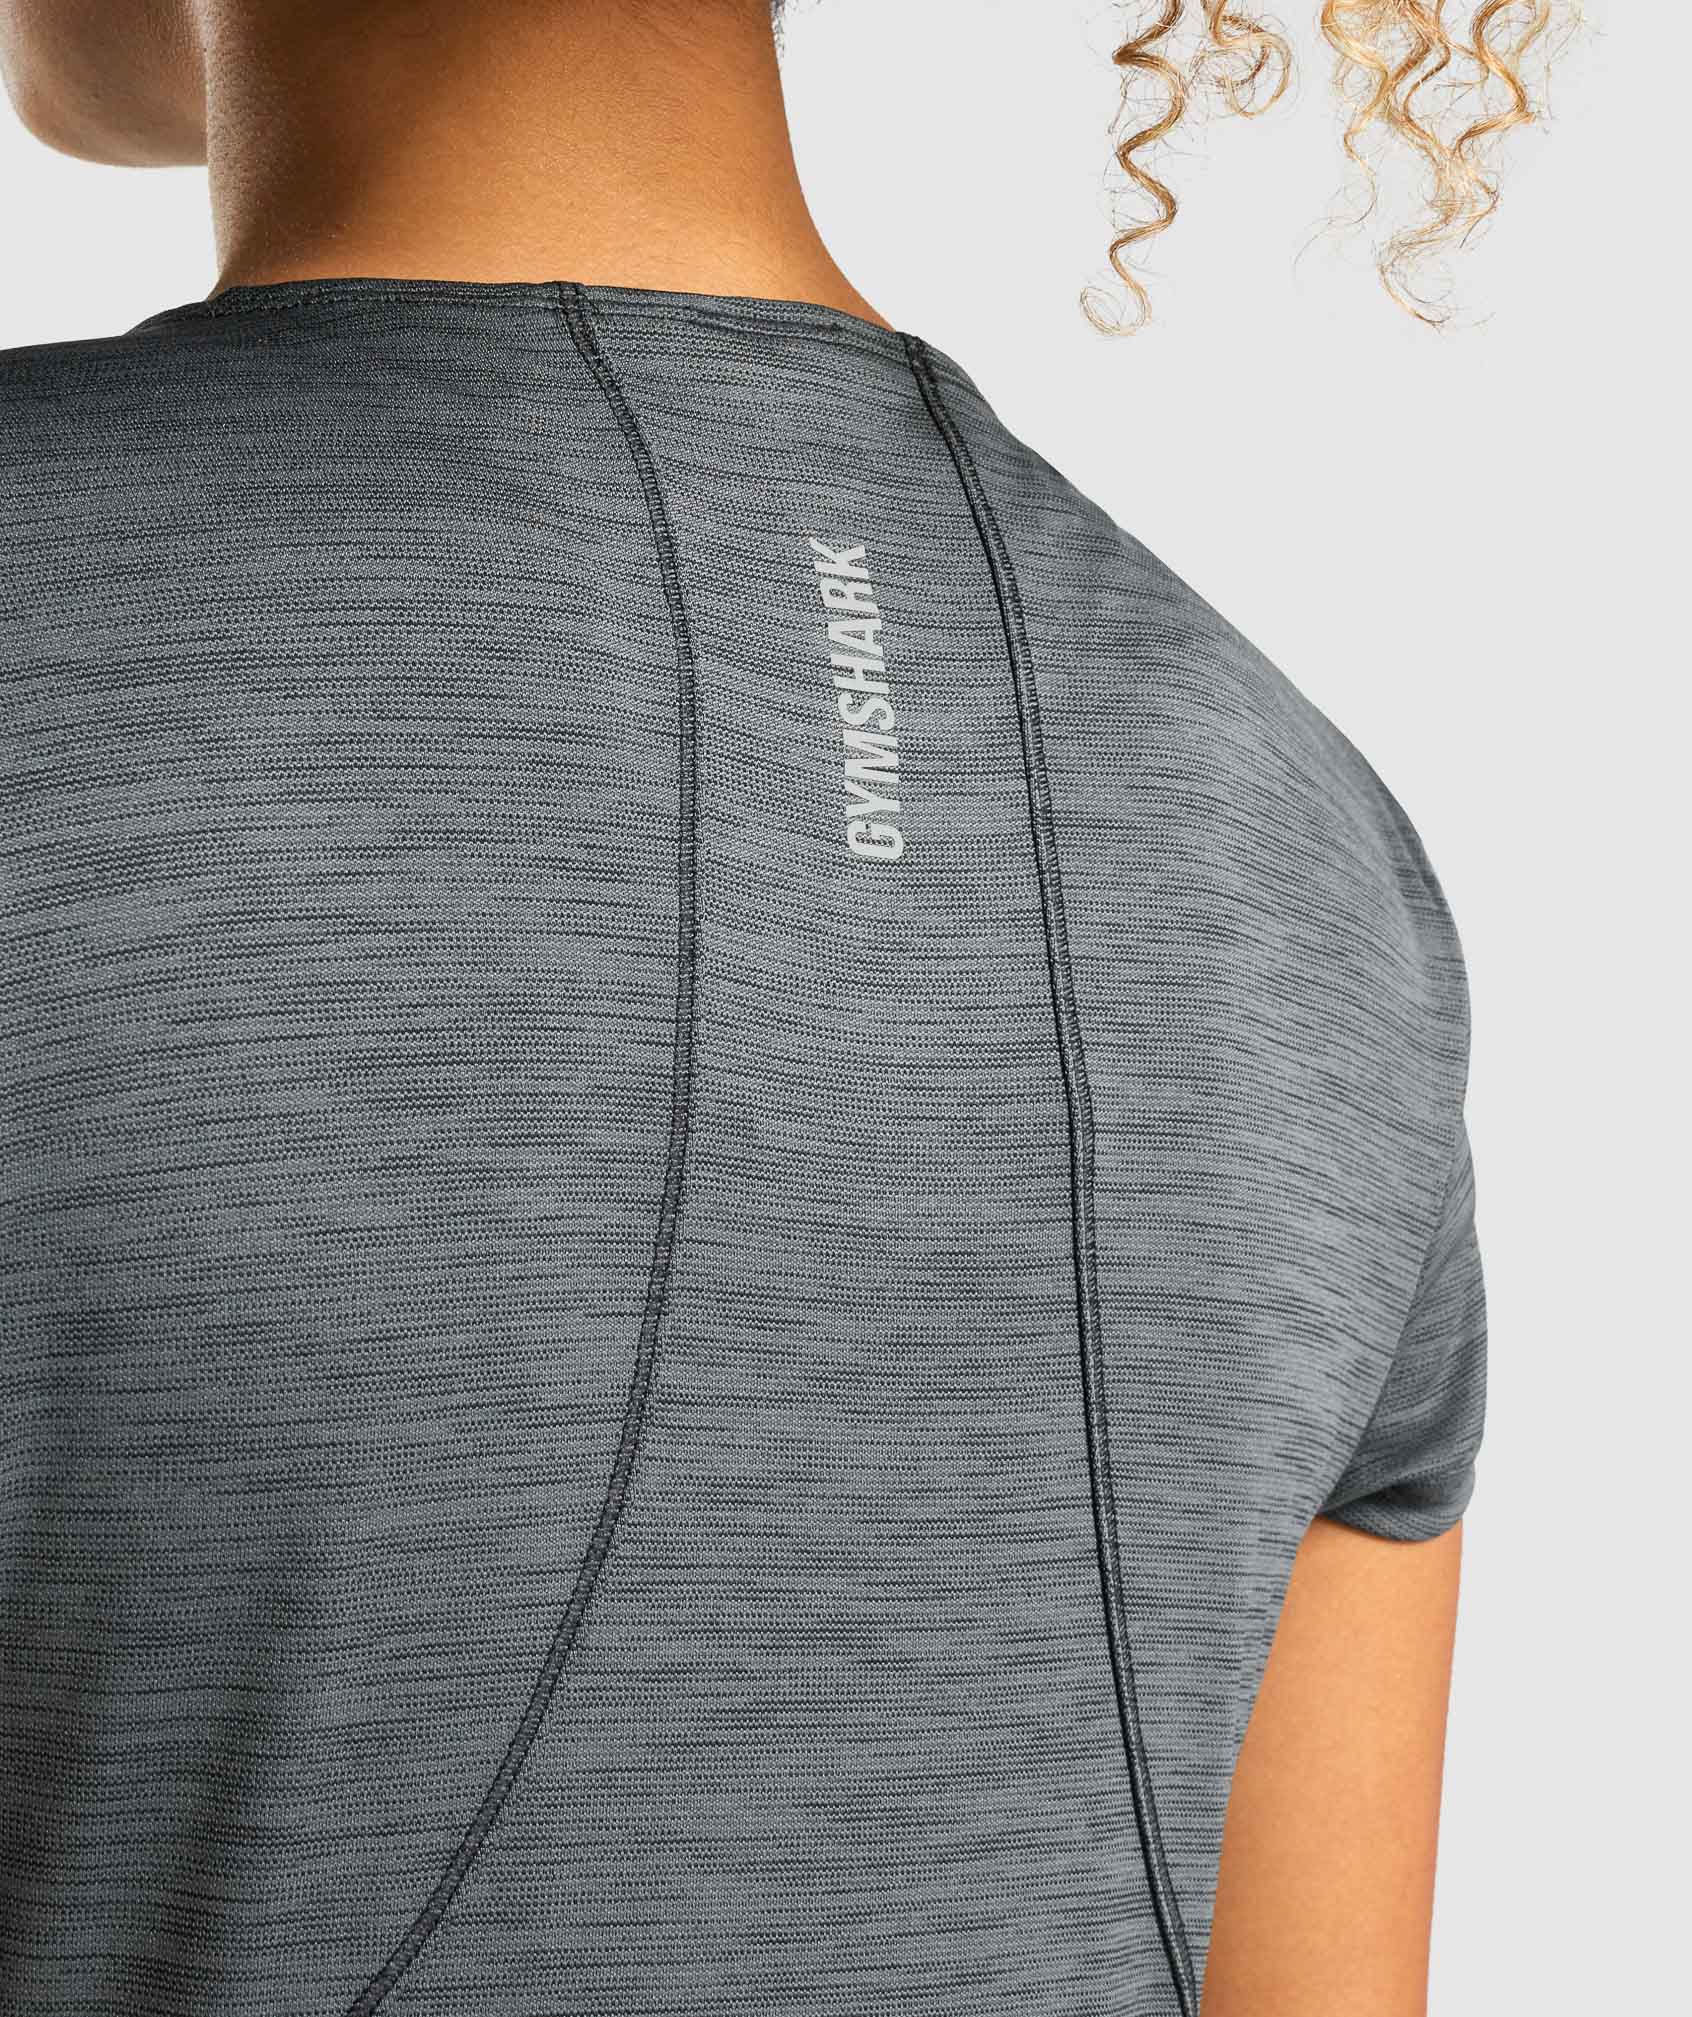 Speed T-Shirt in Charcoal Marl - view 7